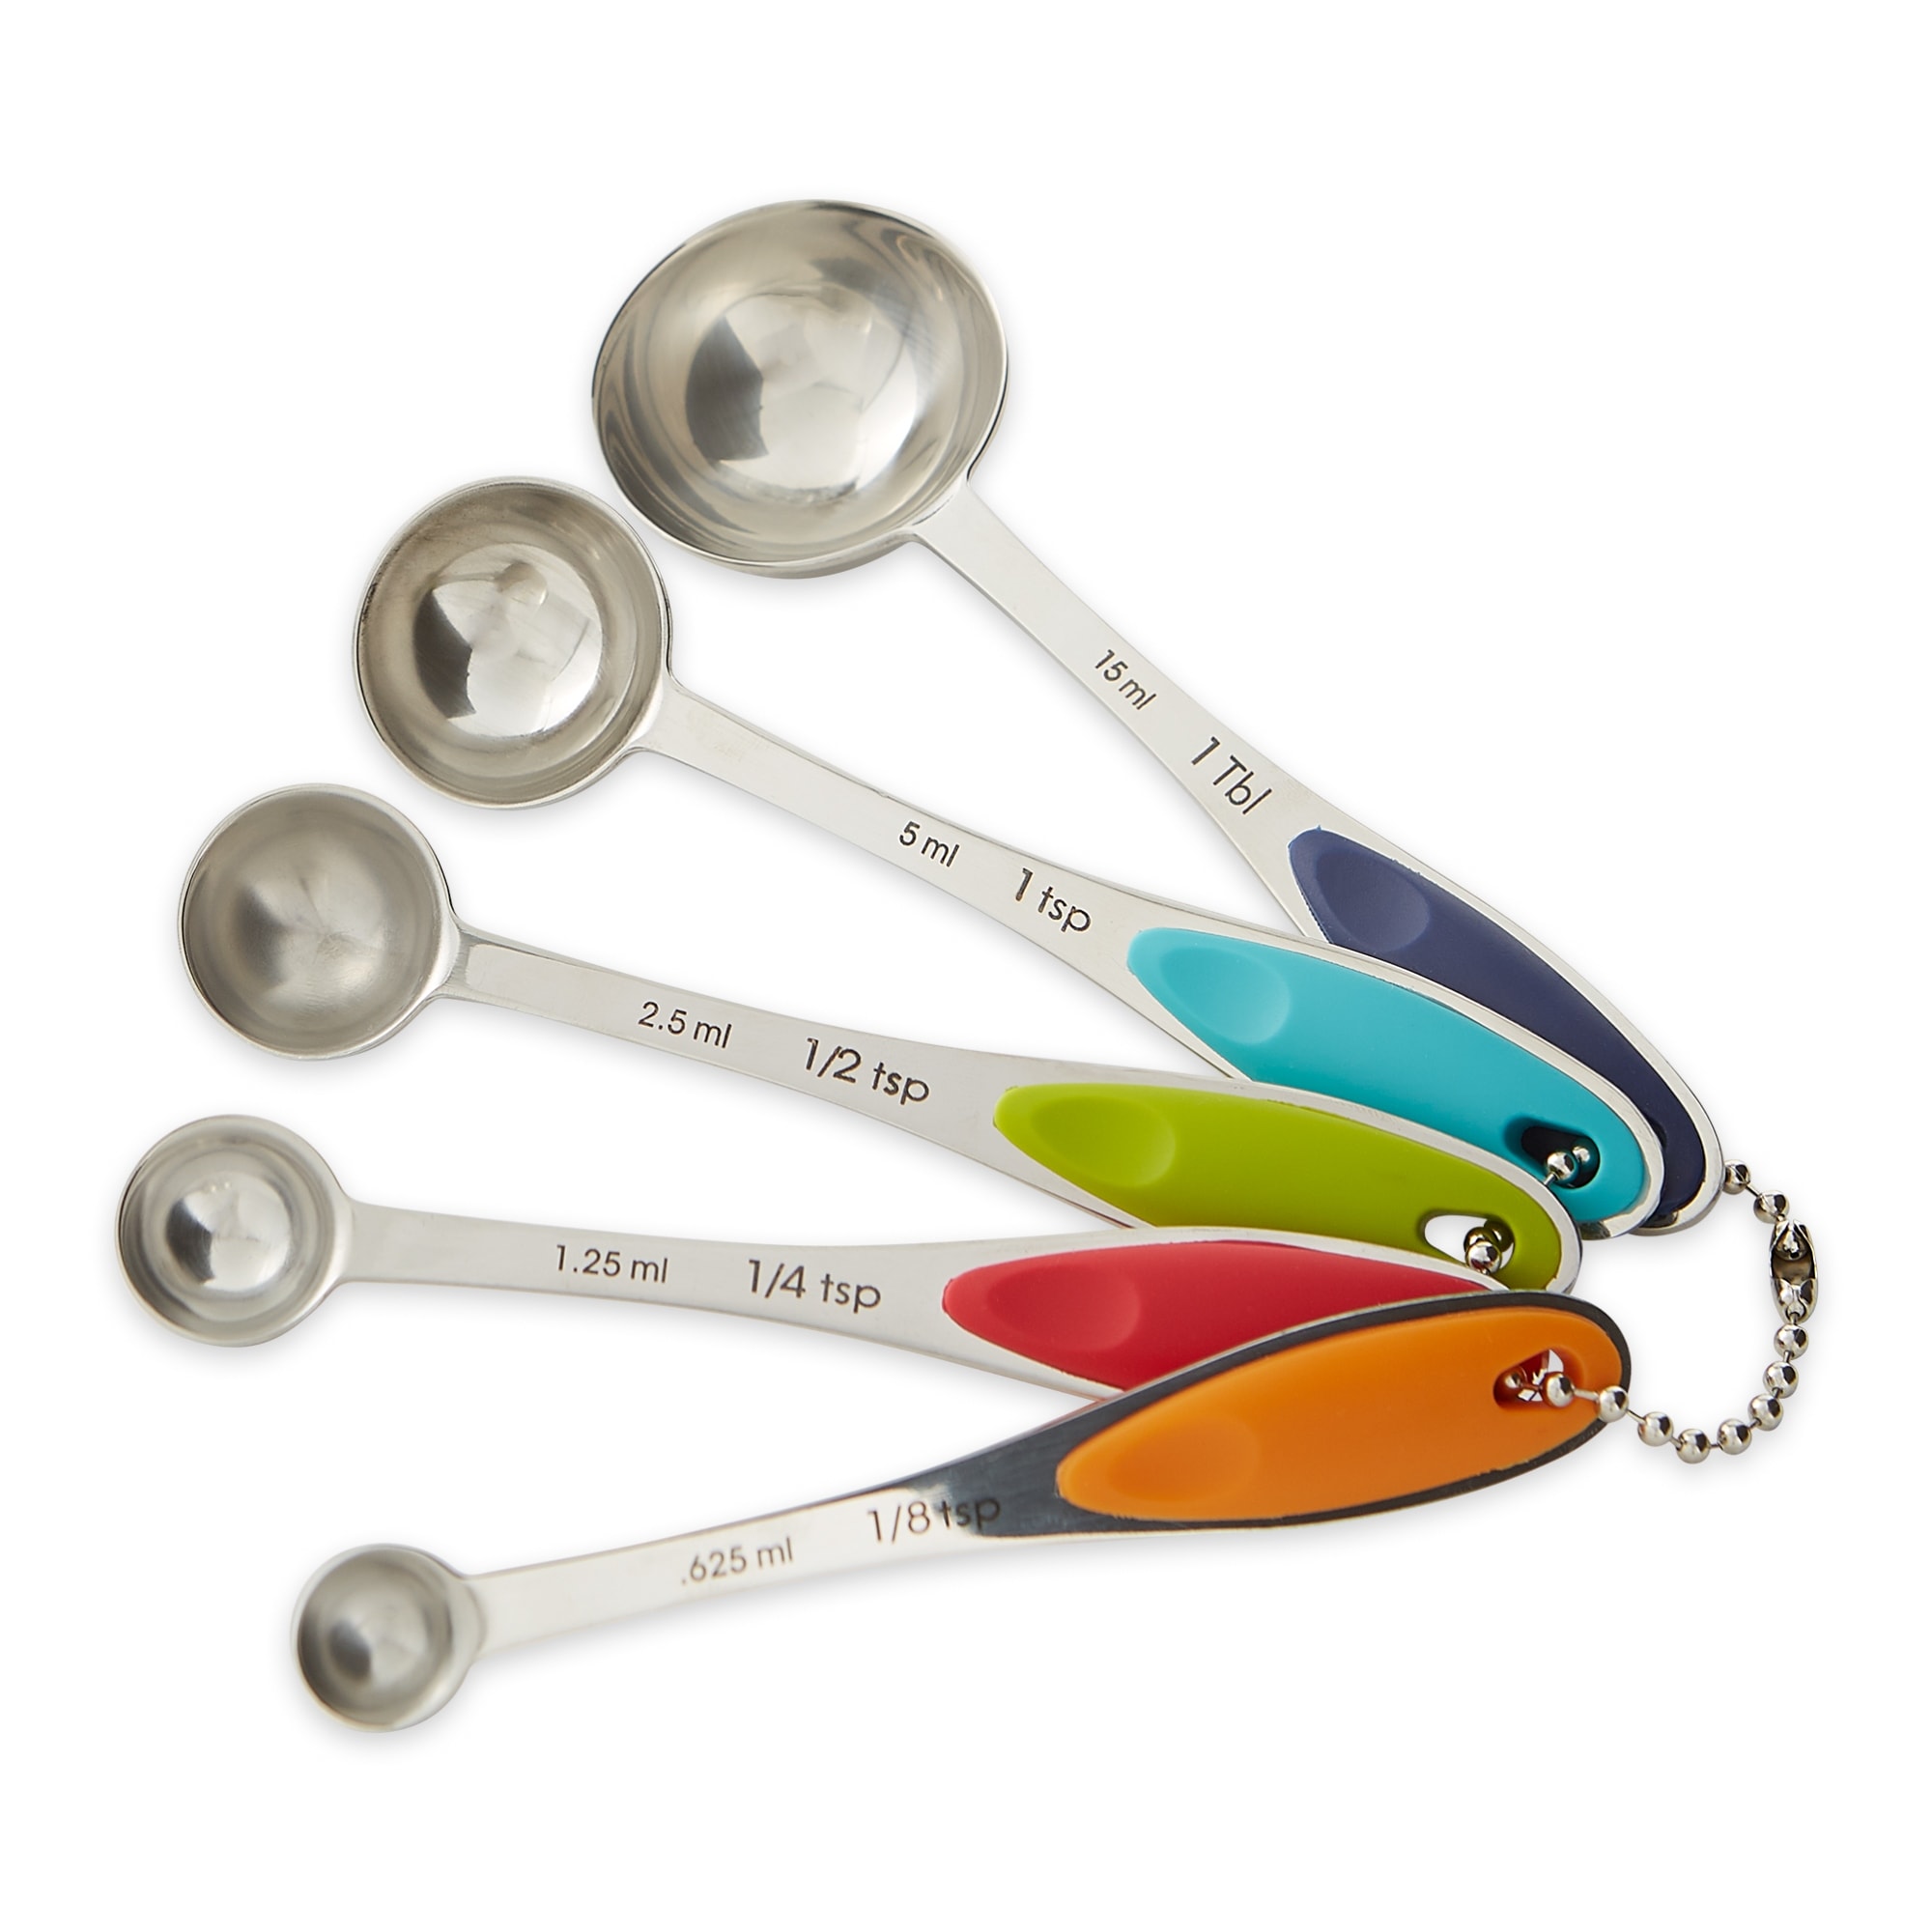 Handy Housewares 5 Piece Colorful Plastic Nesting Measuring Spoon Set - 1/4  tsp to 1 tbsp for Dry or Liquid Ingredients